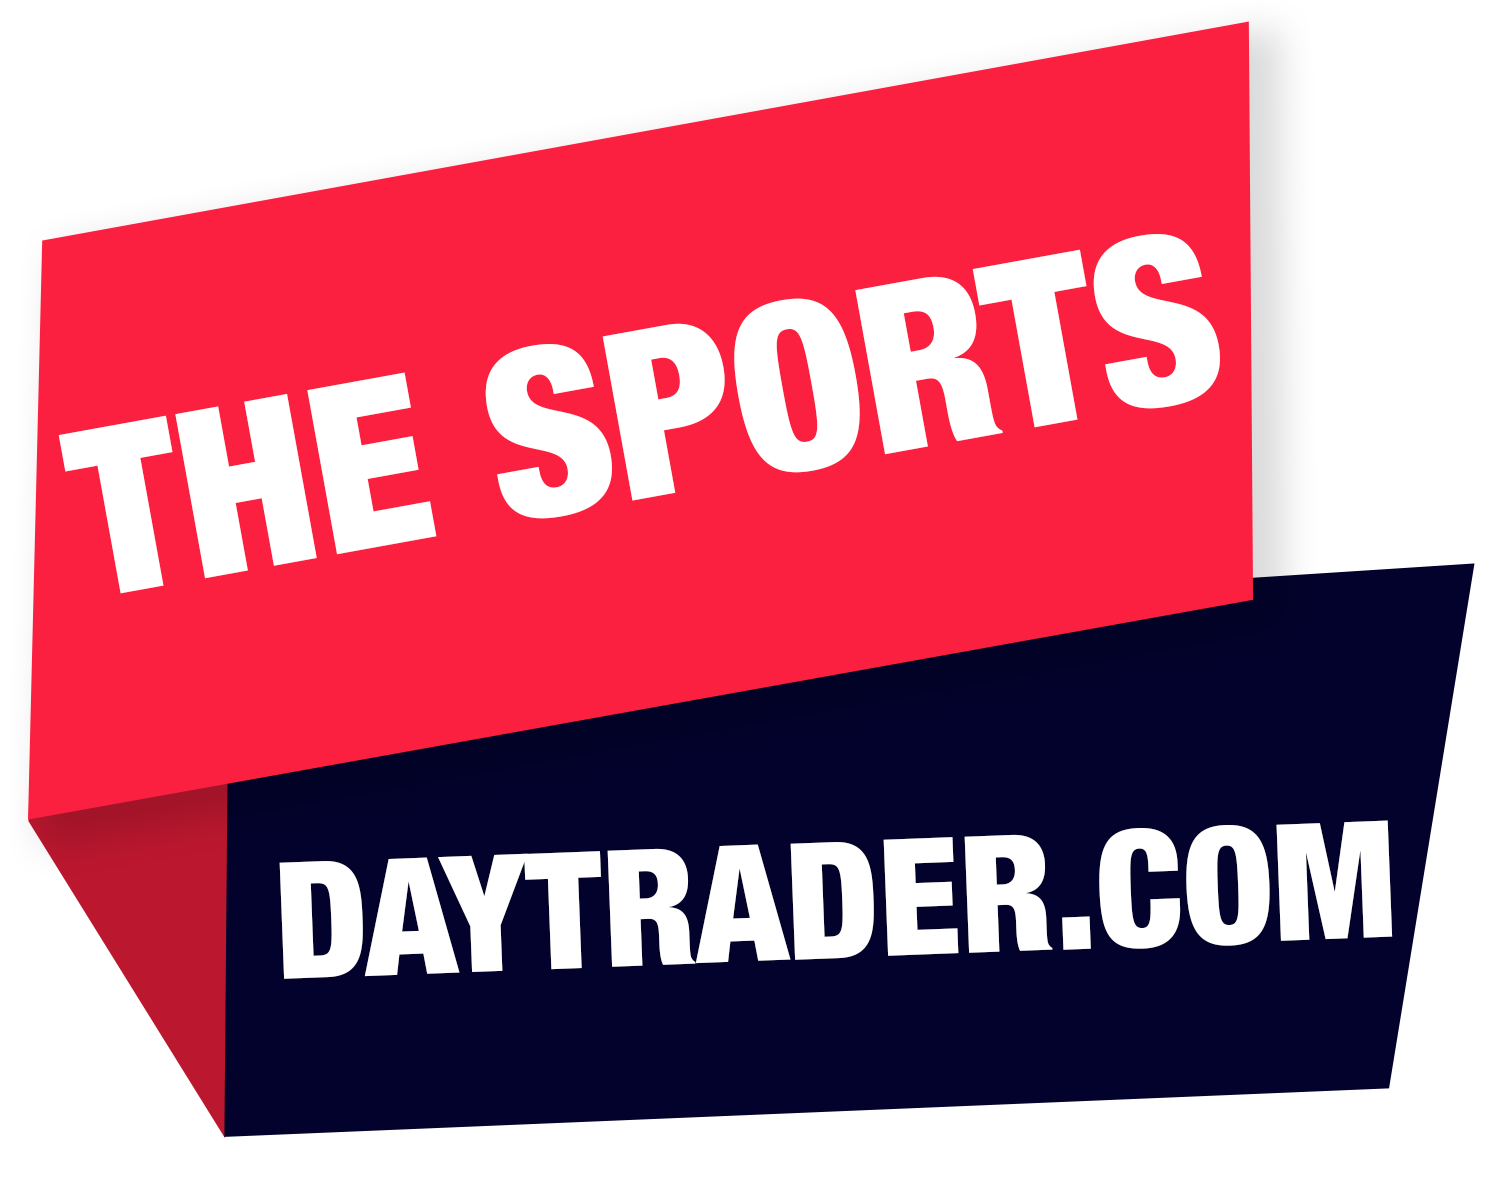 The Sports Day Trader